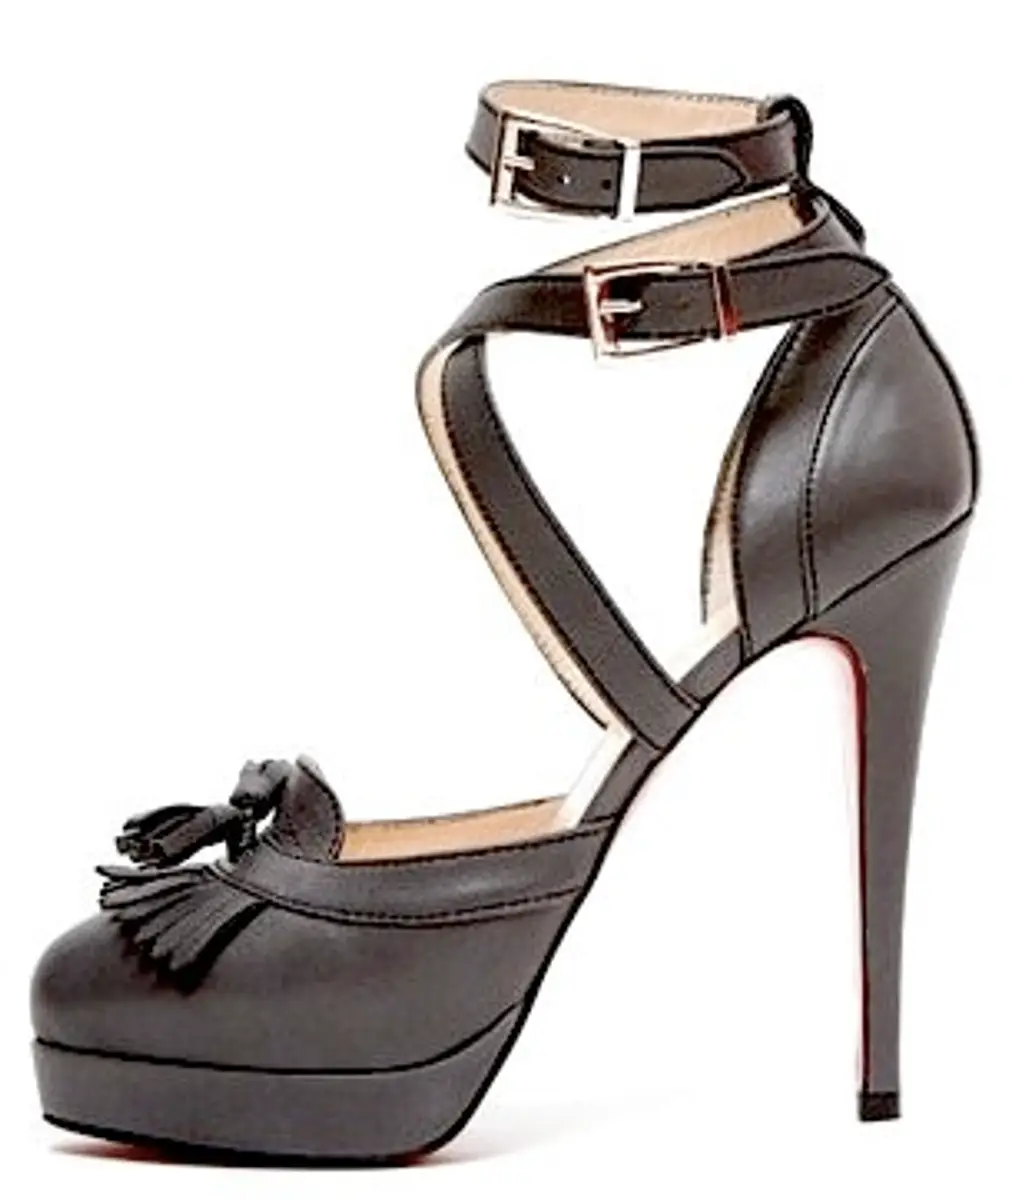 Leather Platform Sandals with Tassel Detail by Christian Louboutin